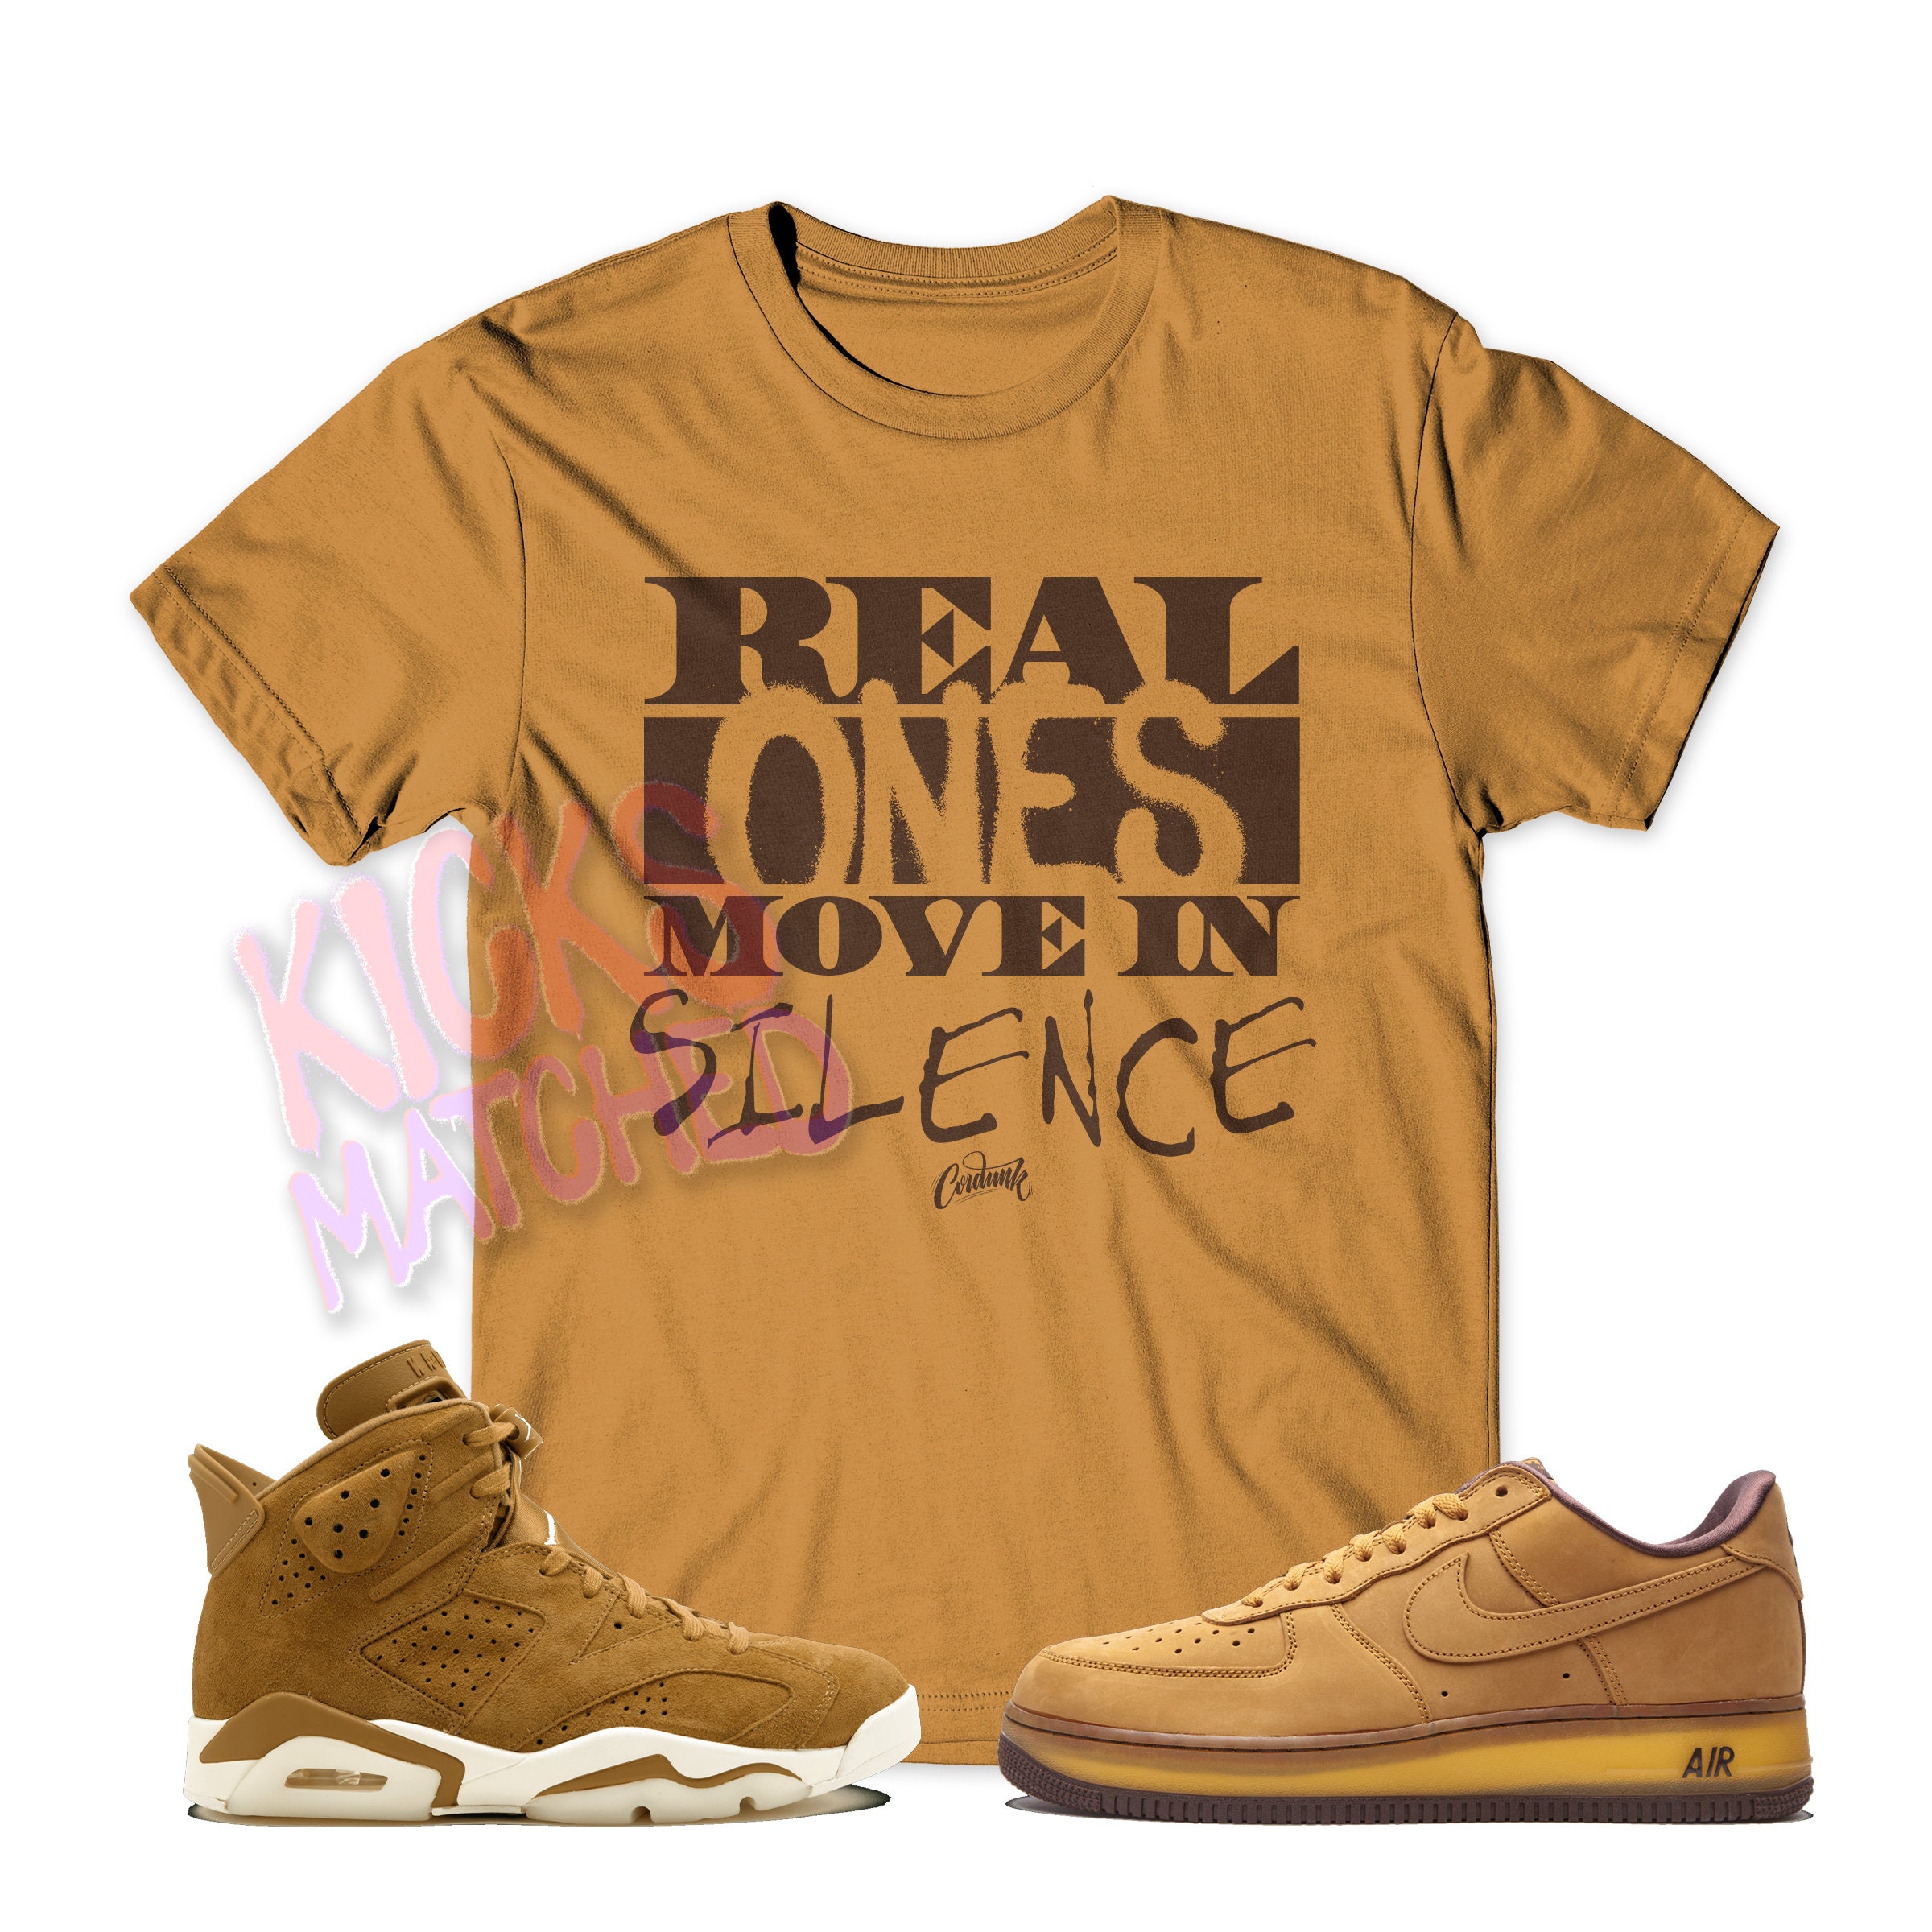 Nike Air Force 1 Low Sun Club Shirts Hats Clothing Outfits